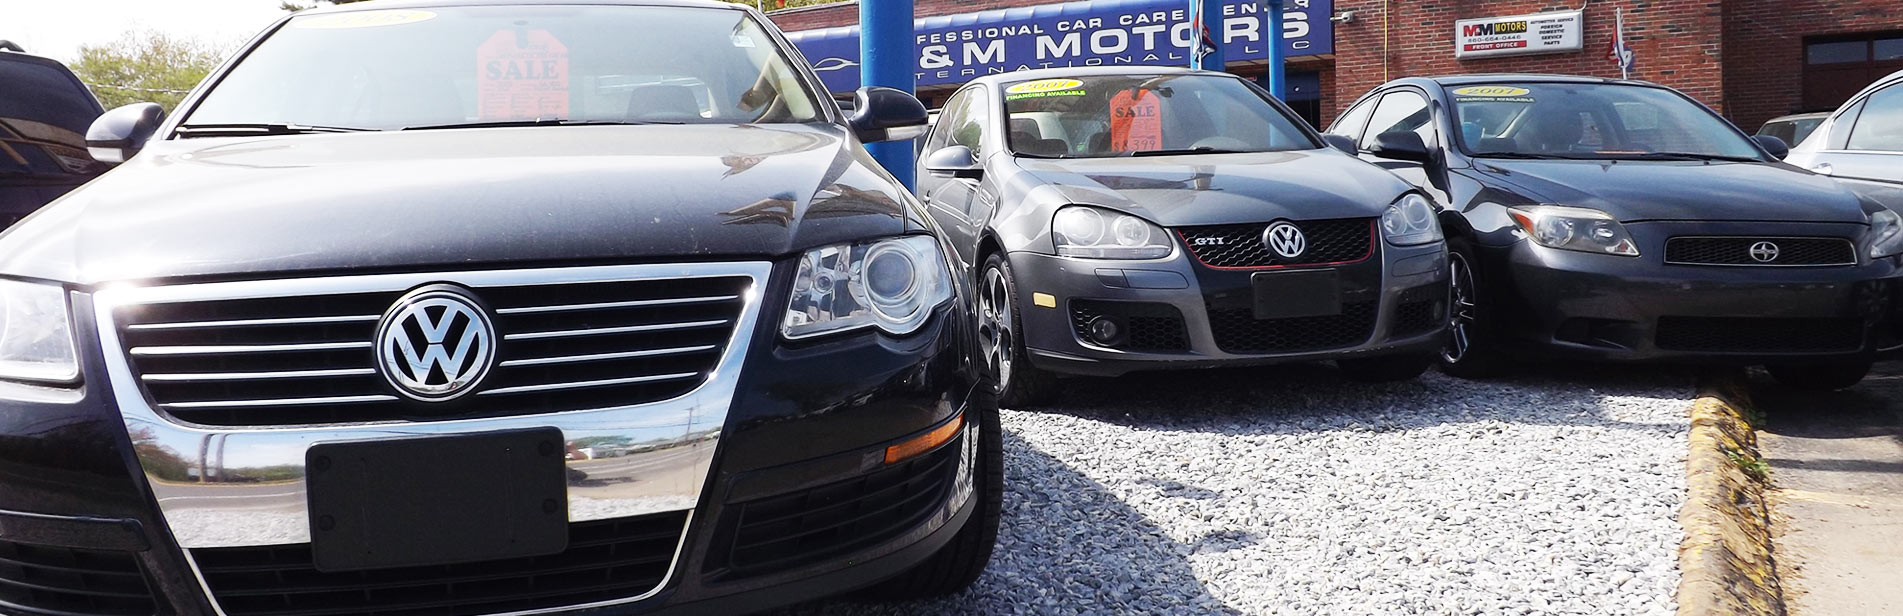 Used cars for sale in Clinton | M&M Motors International. Clinton Connecticut